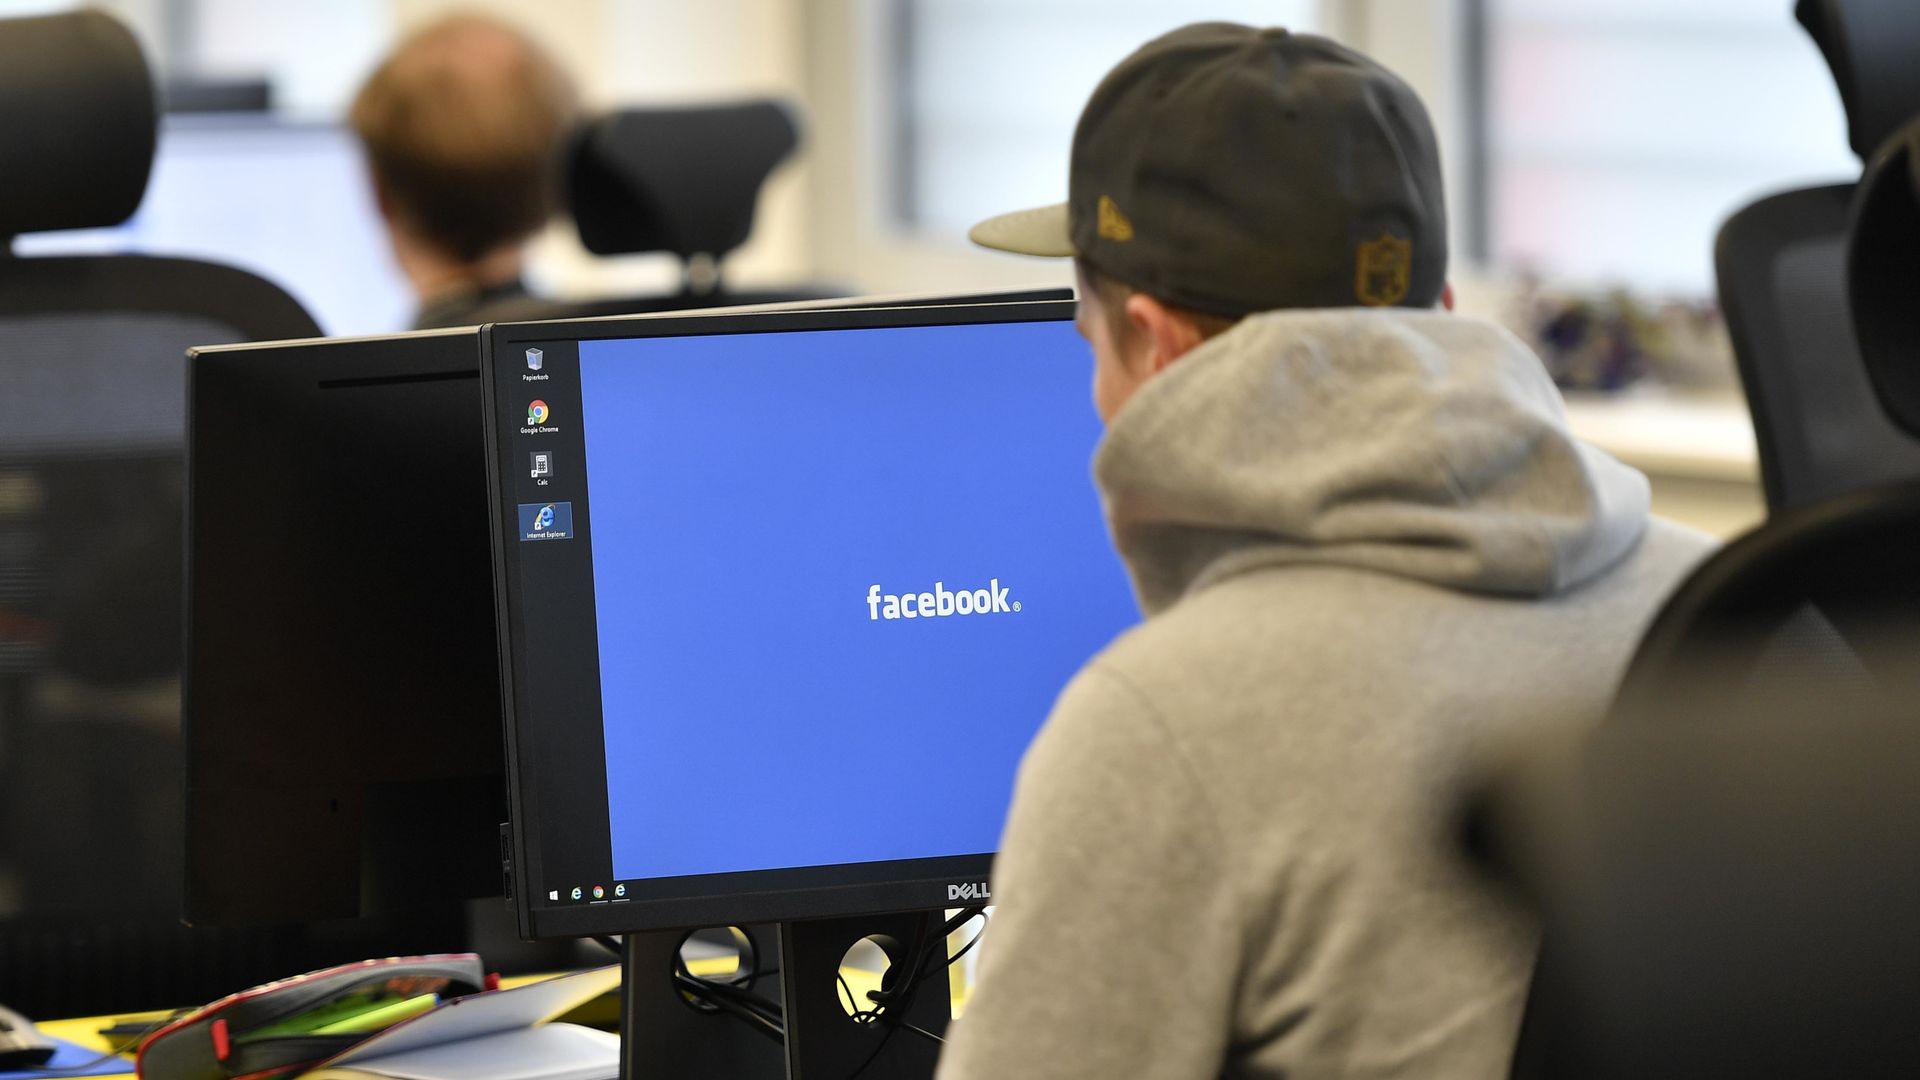 Employees of the Competence Call Center (CCC) work for the Facebook Community Operations Team in Essen, Germany.